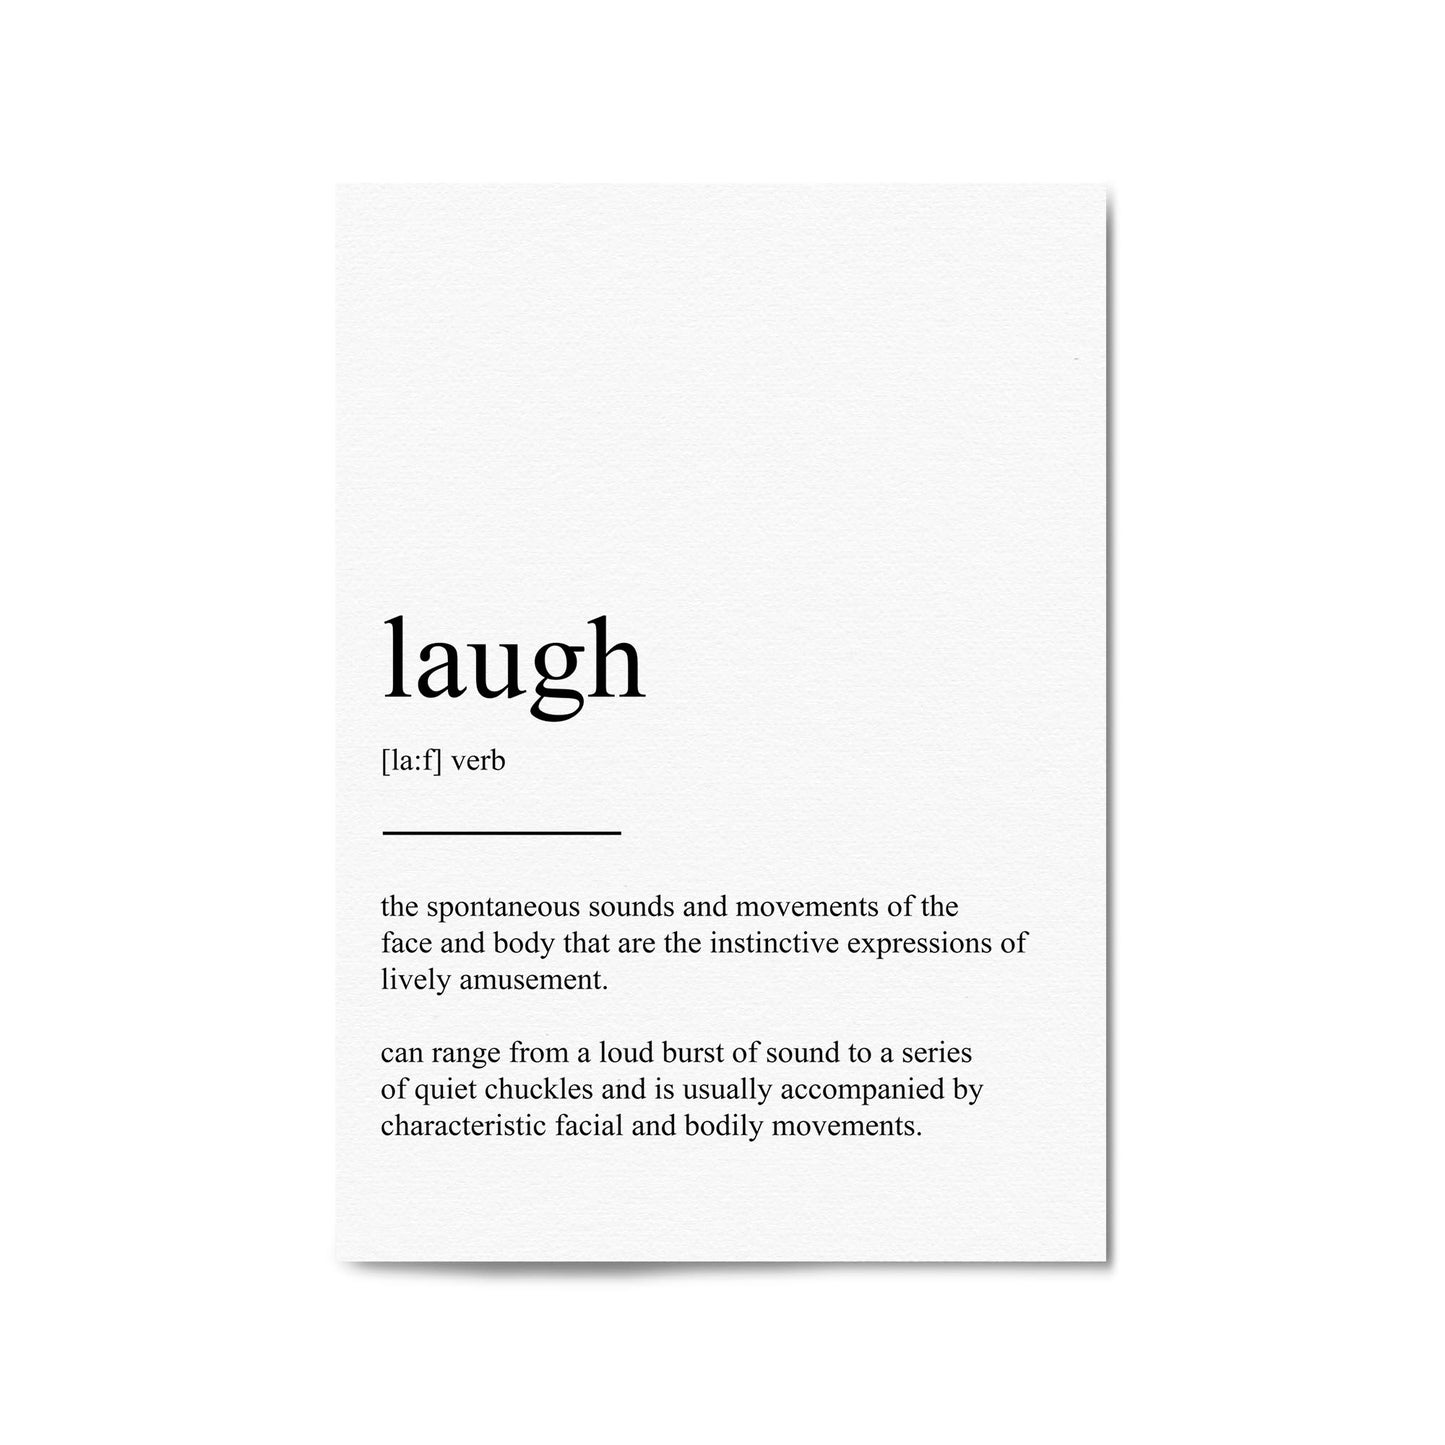 Dictionary Definition "Laugh" Bedroom Wall Art - The Affordable Art Company